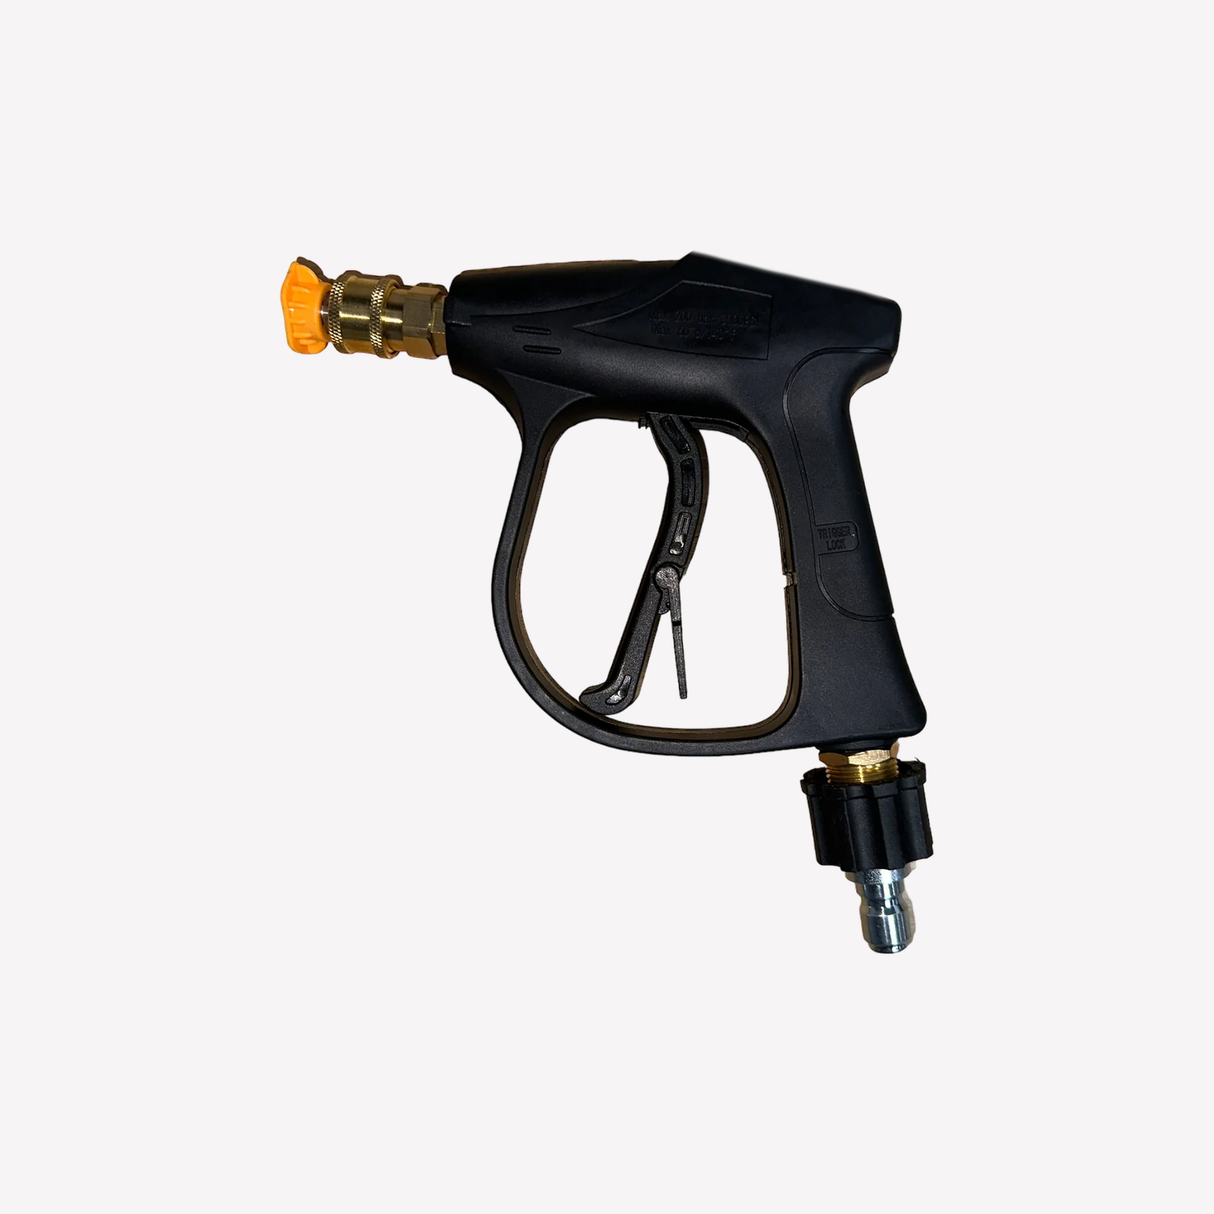 Harbor Freight Quick Disconnect Pressure Washer Upgrade Gun Upgrade with Nozzles